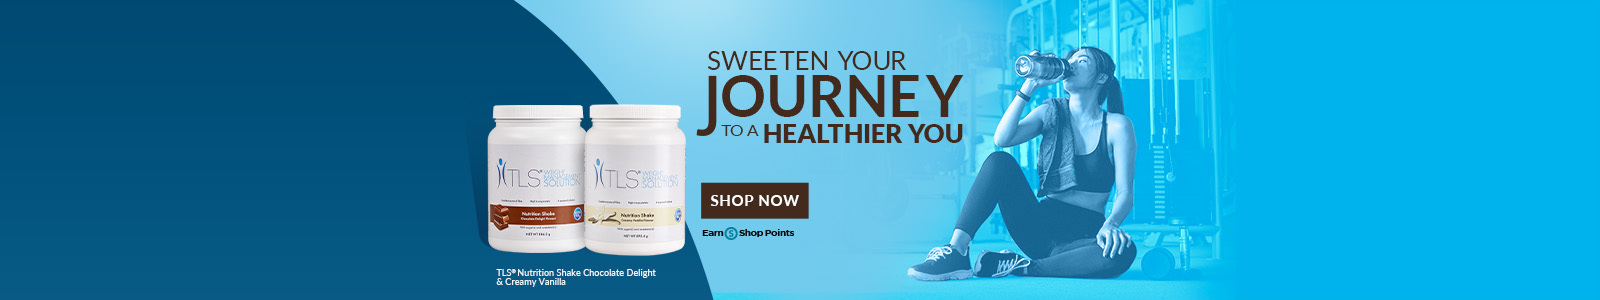 Sweeten your Journey to a healthier you Shop Now Earn Points